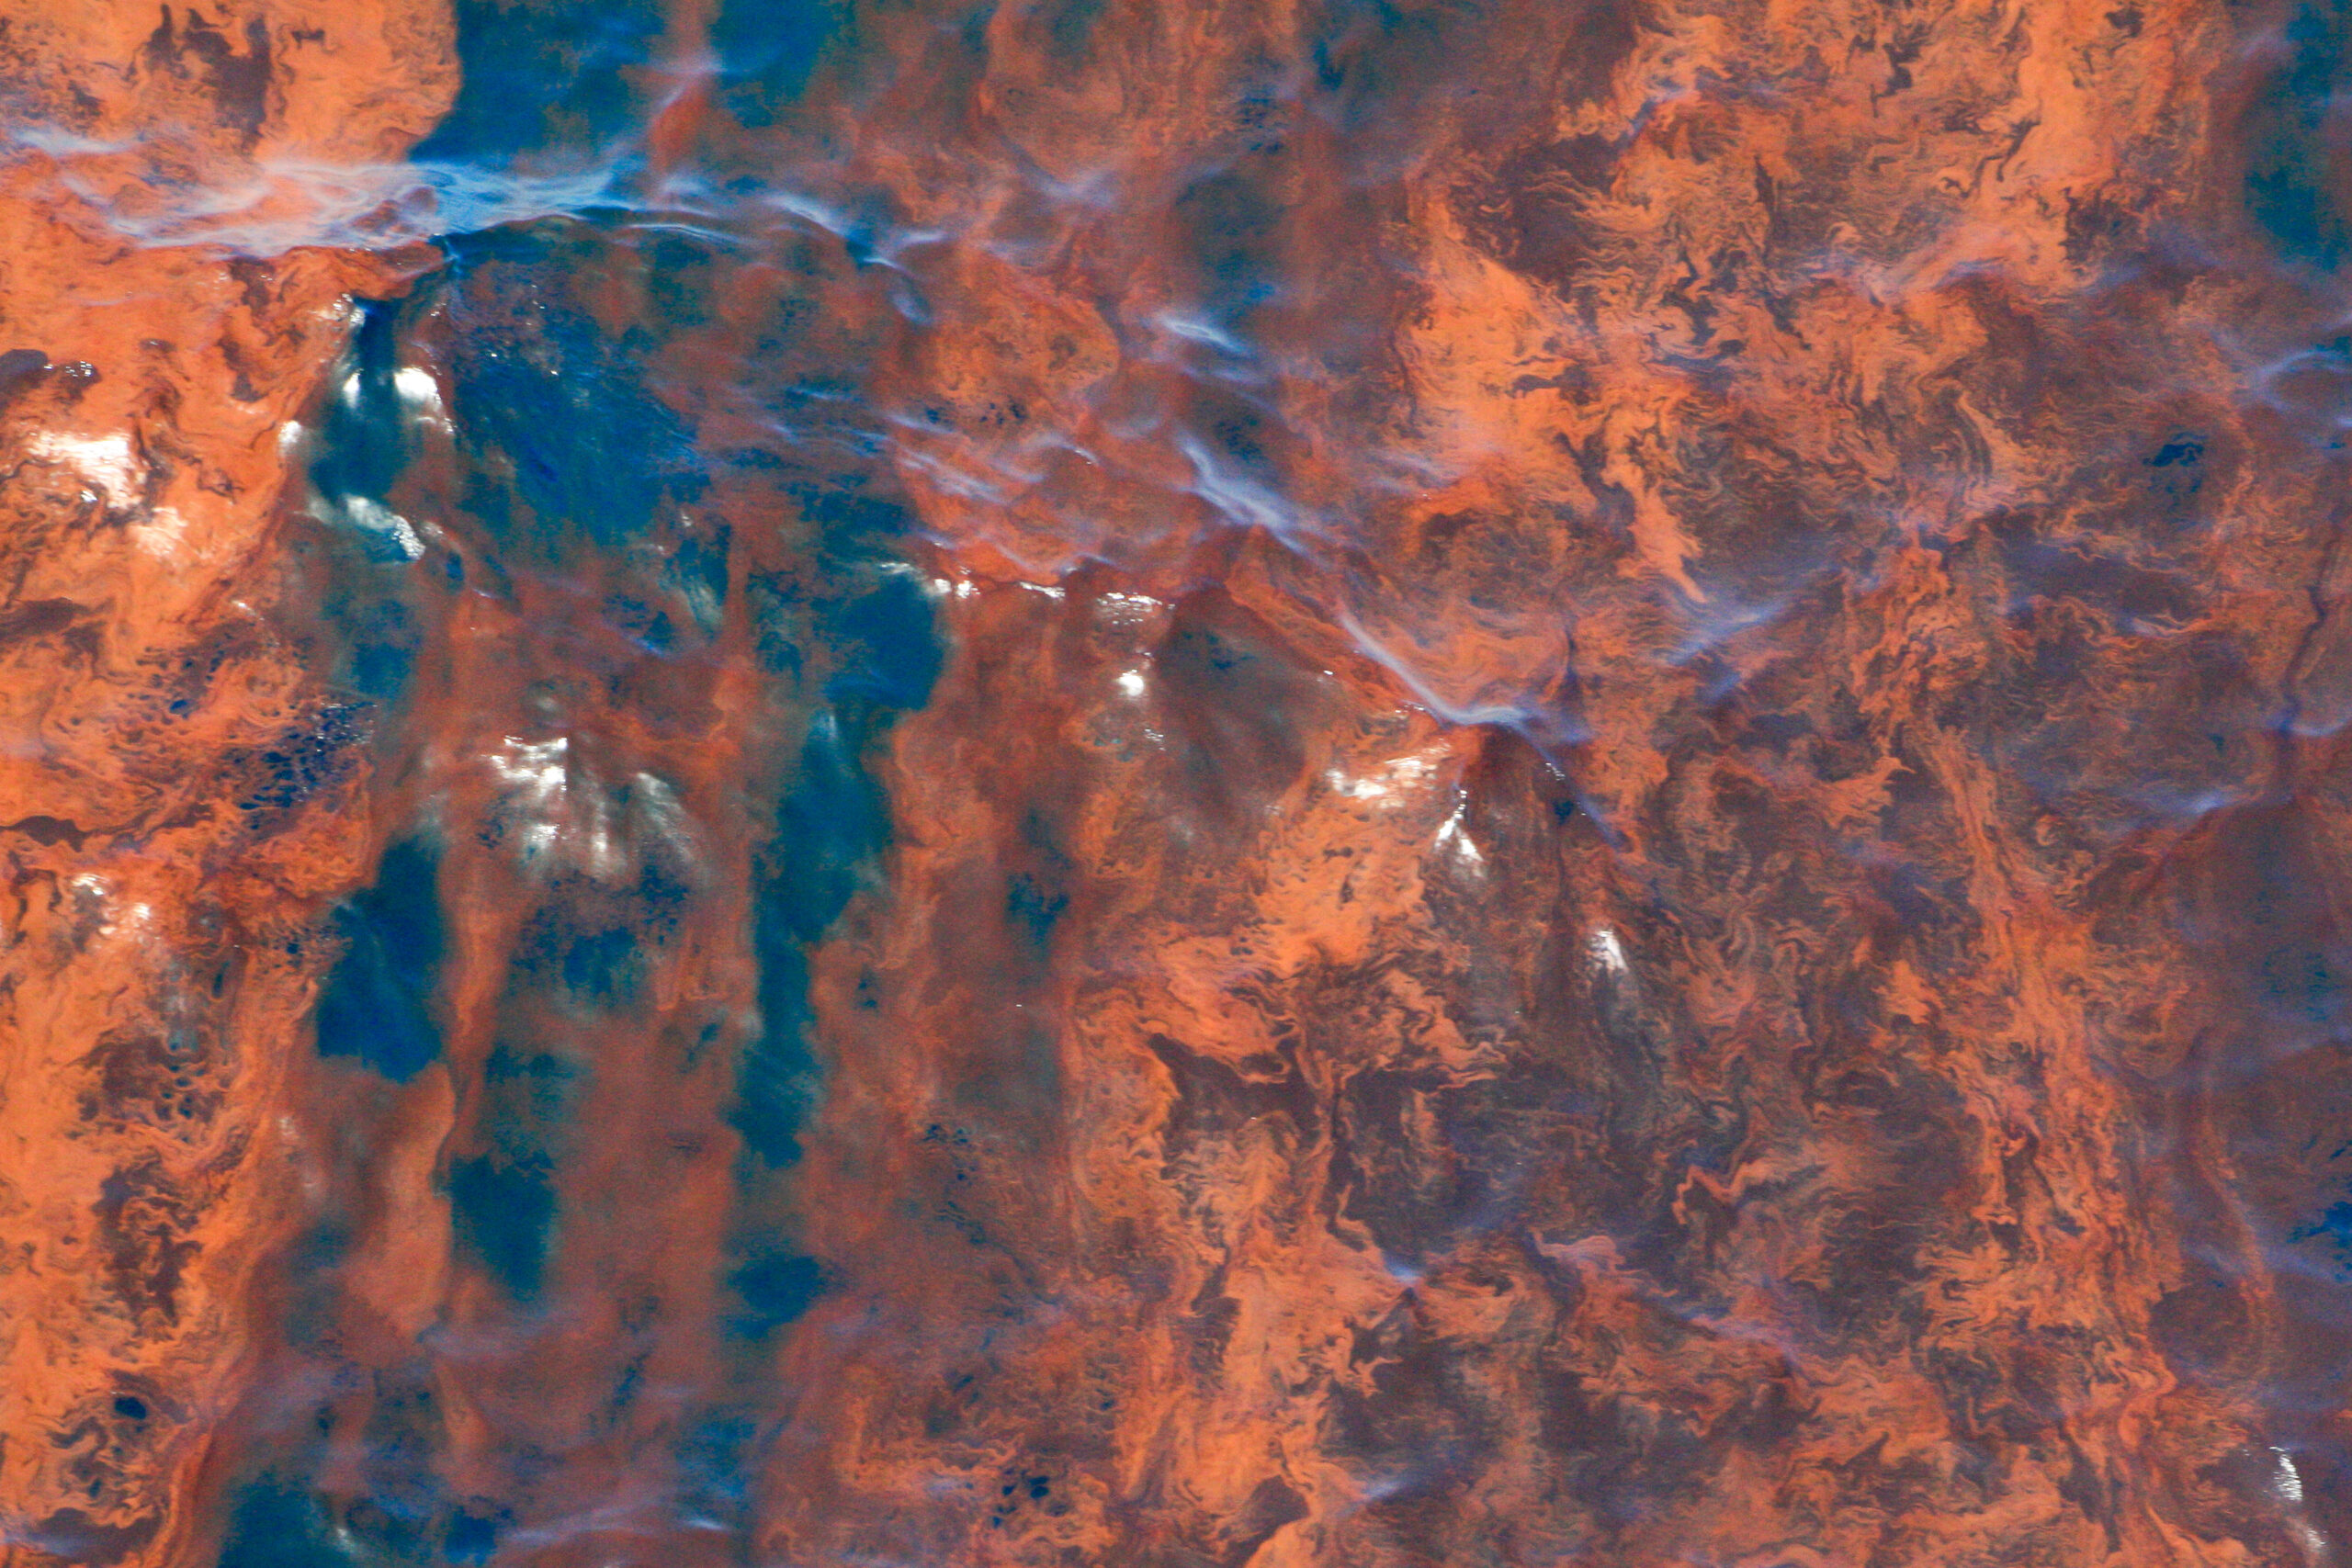 Shell Oil Spill Spews More than 88,000 Gallons into the Gulf of Mexico